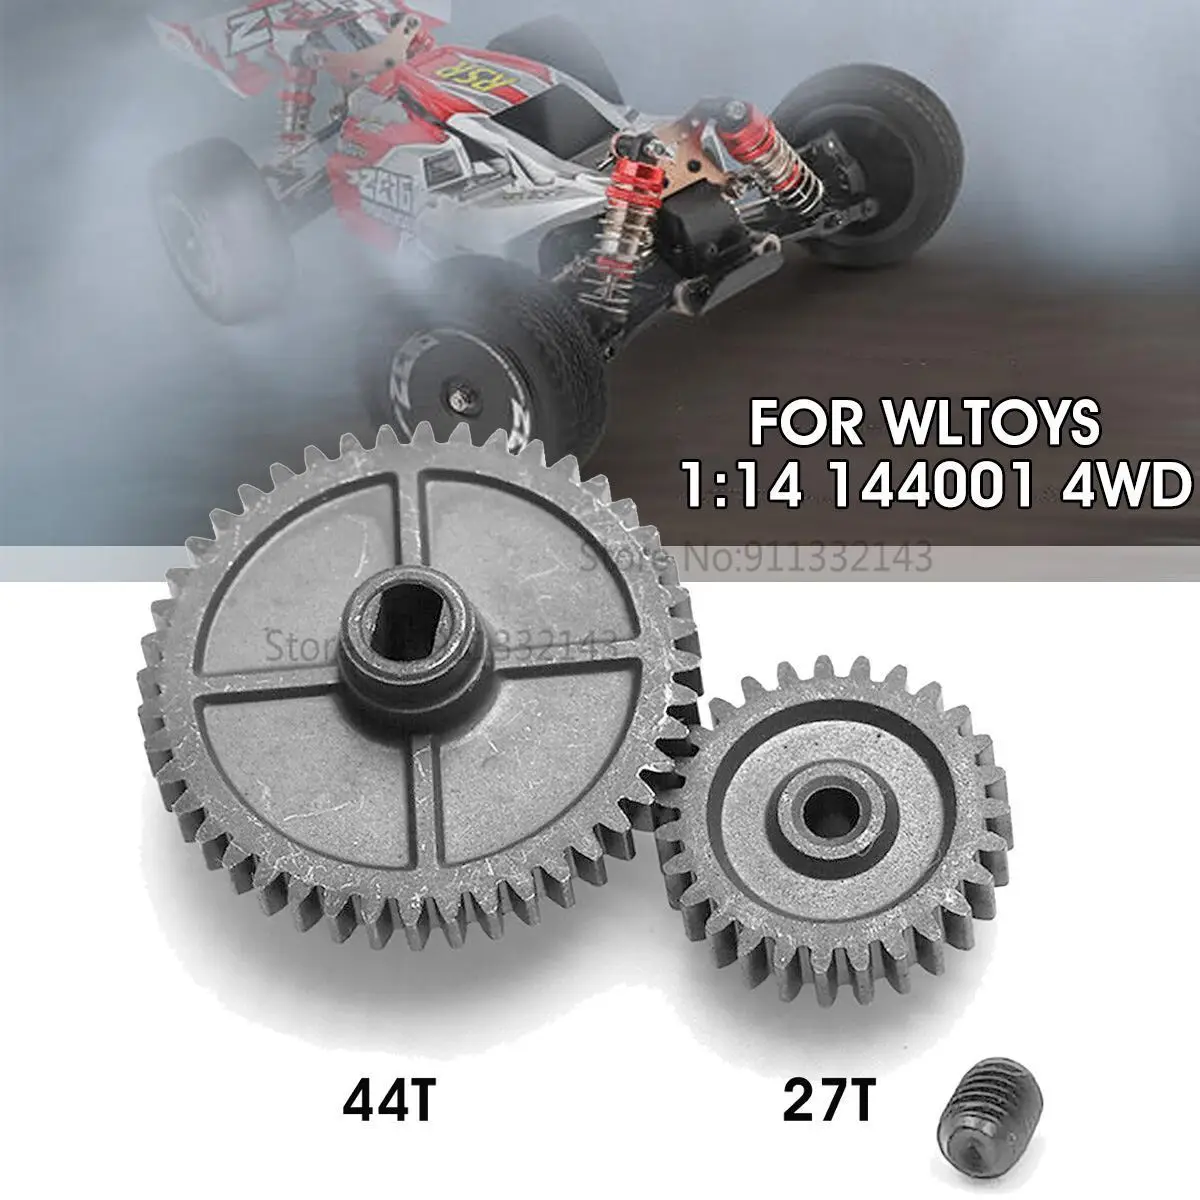 

Steel Metal 44T Diff Main Gear Reduction Gear & 27T Motor Gear Pinion for WLtoys 144001 1/14 RC Car Upgrade Parts